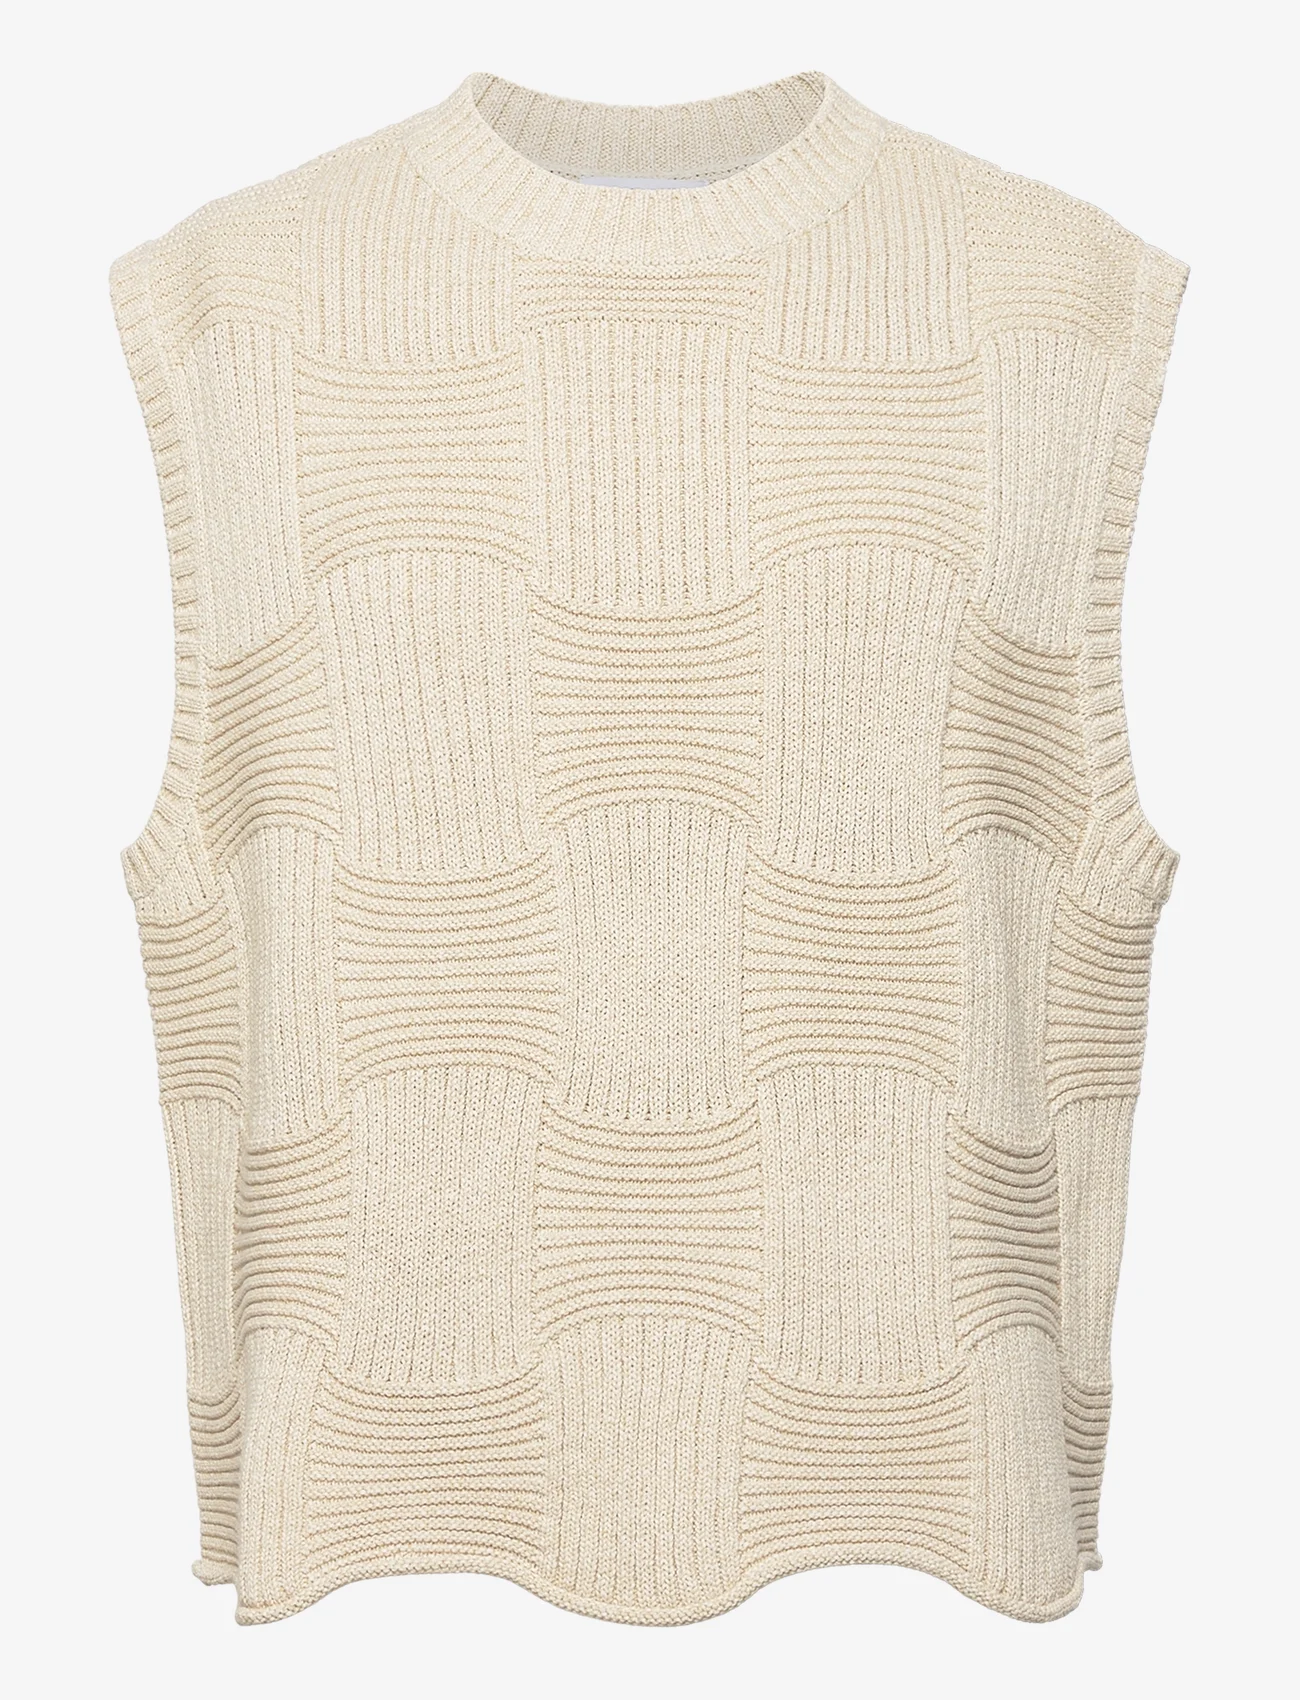 Hope - Trap Vest Offwhite - knitted vests - offwhite - 0